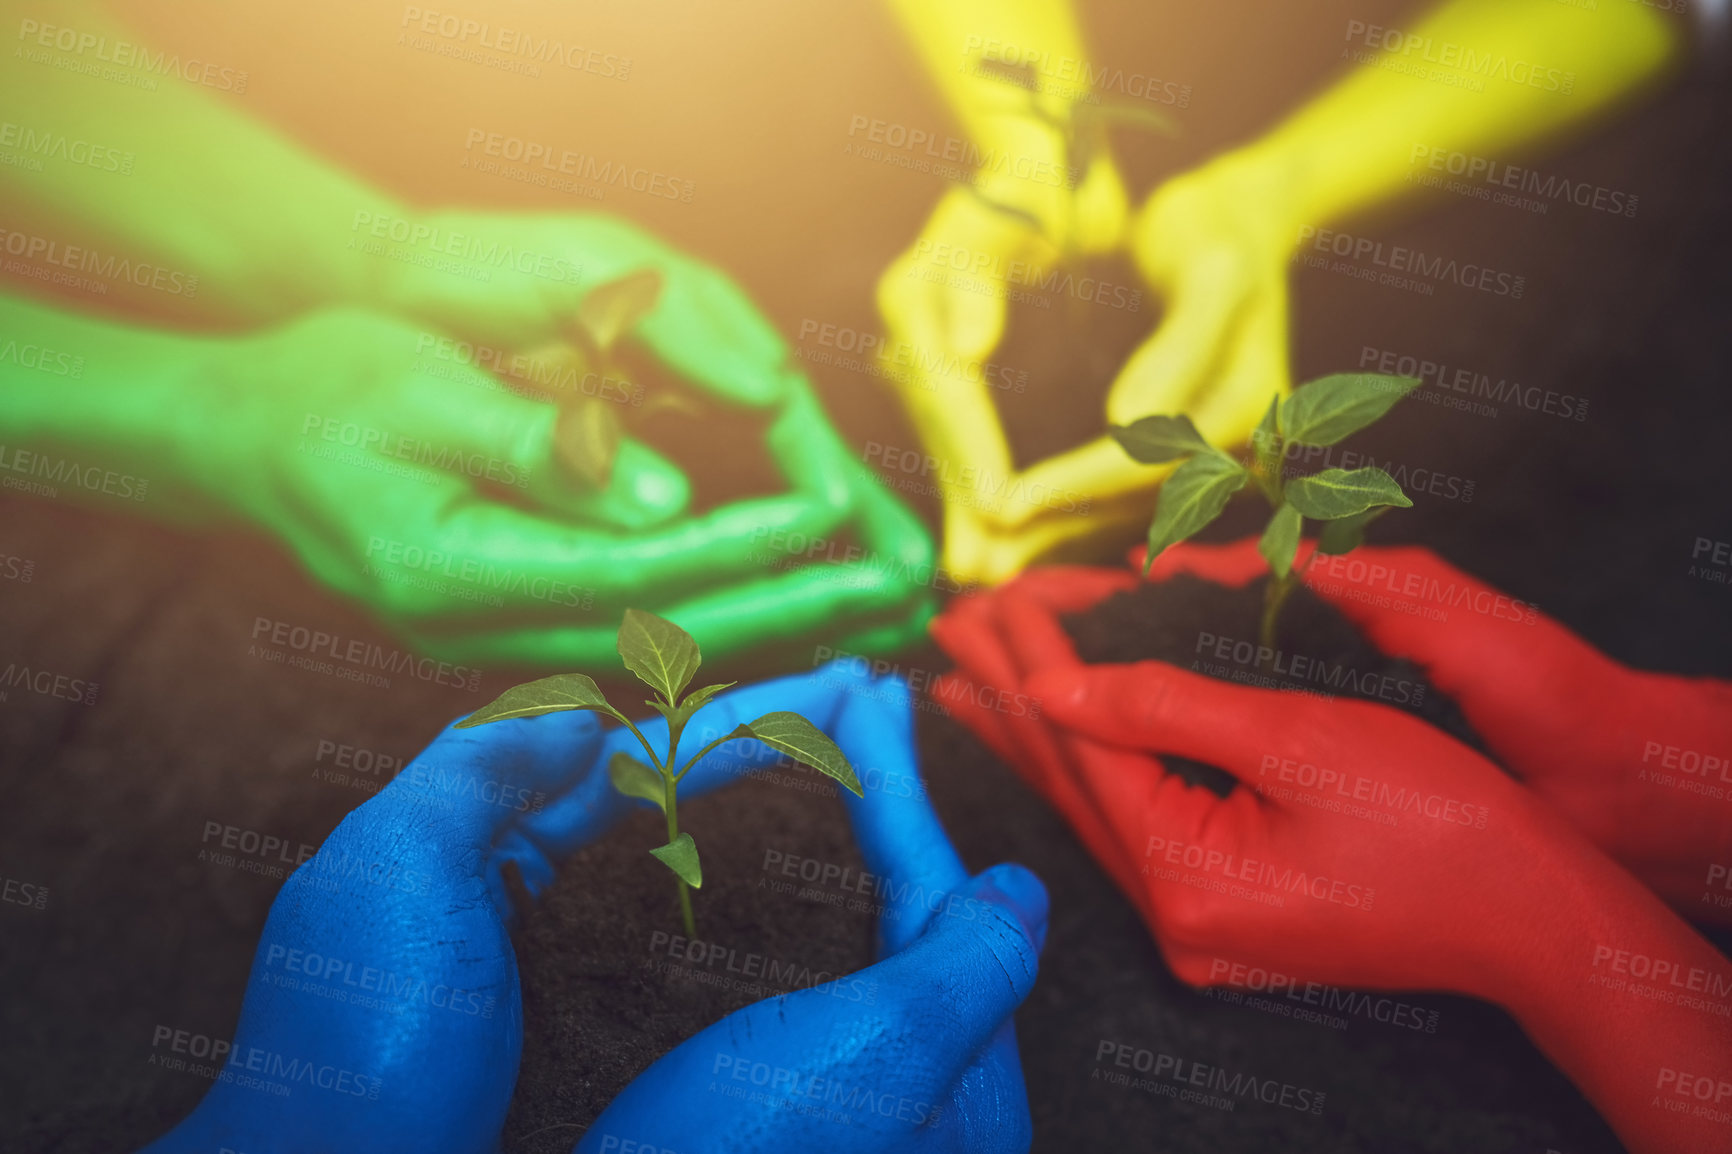 Buy stock photo Cropped shot of unrecognizable people holding budding plants in their multi colored hands